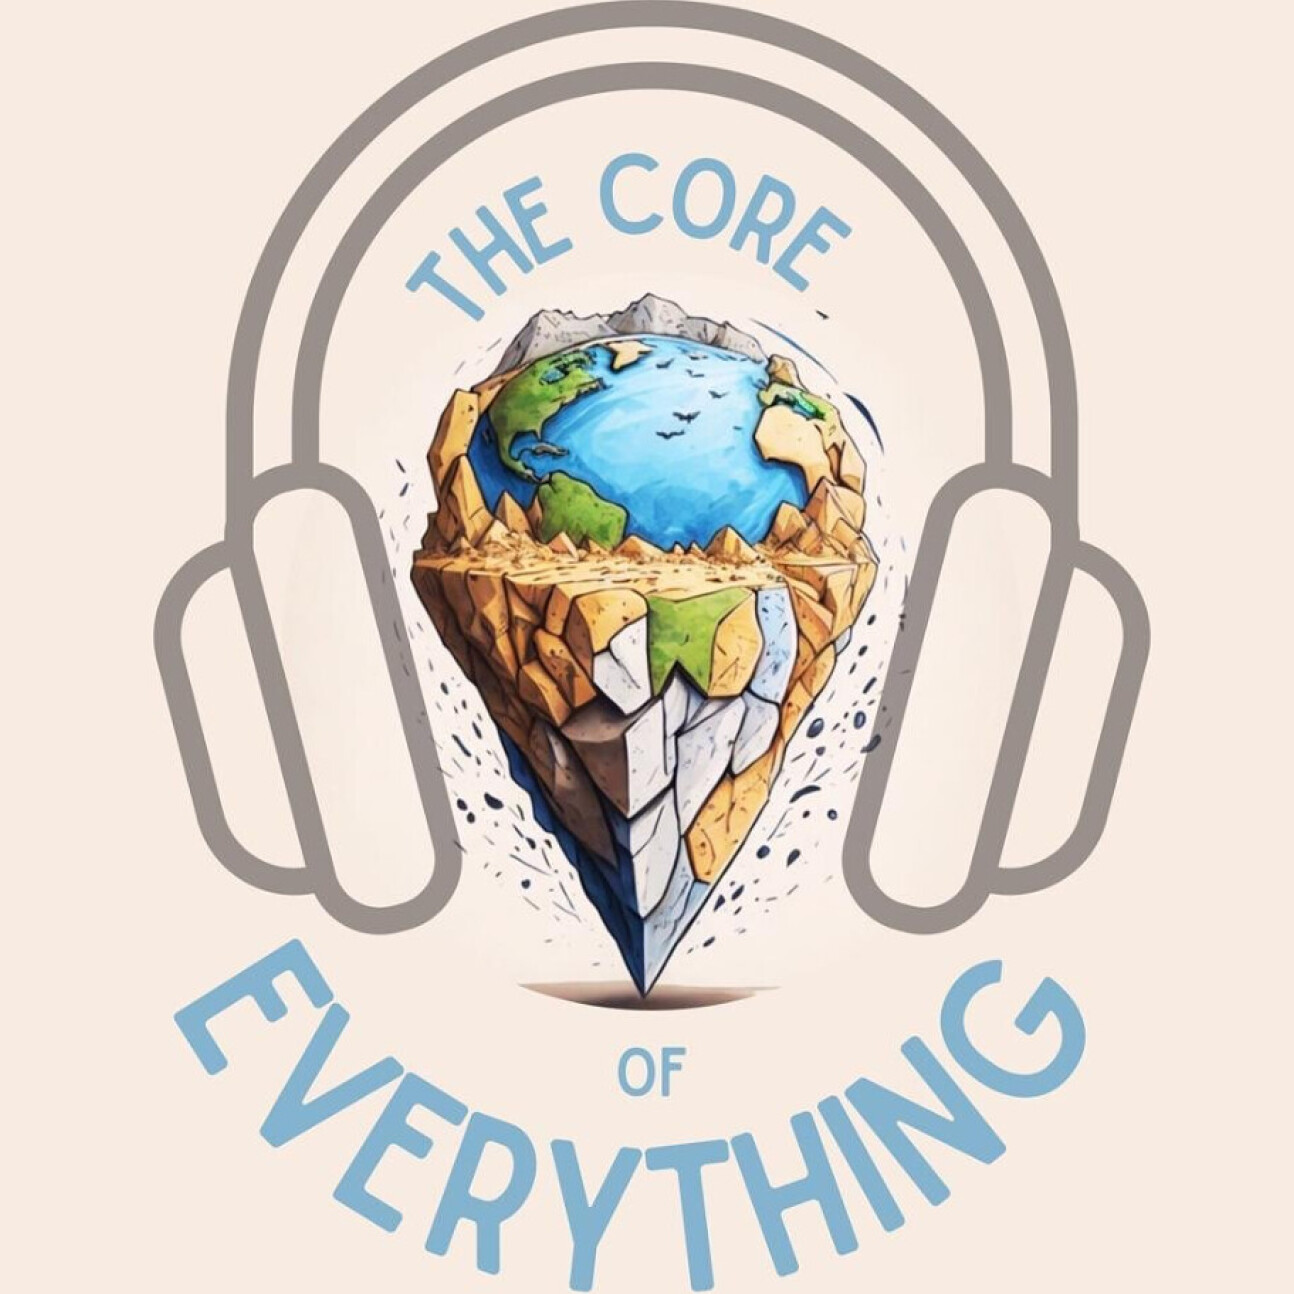 The logo of The Core of Everything, showing the Earth with headphones over it